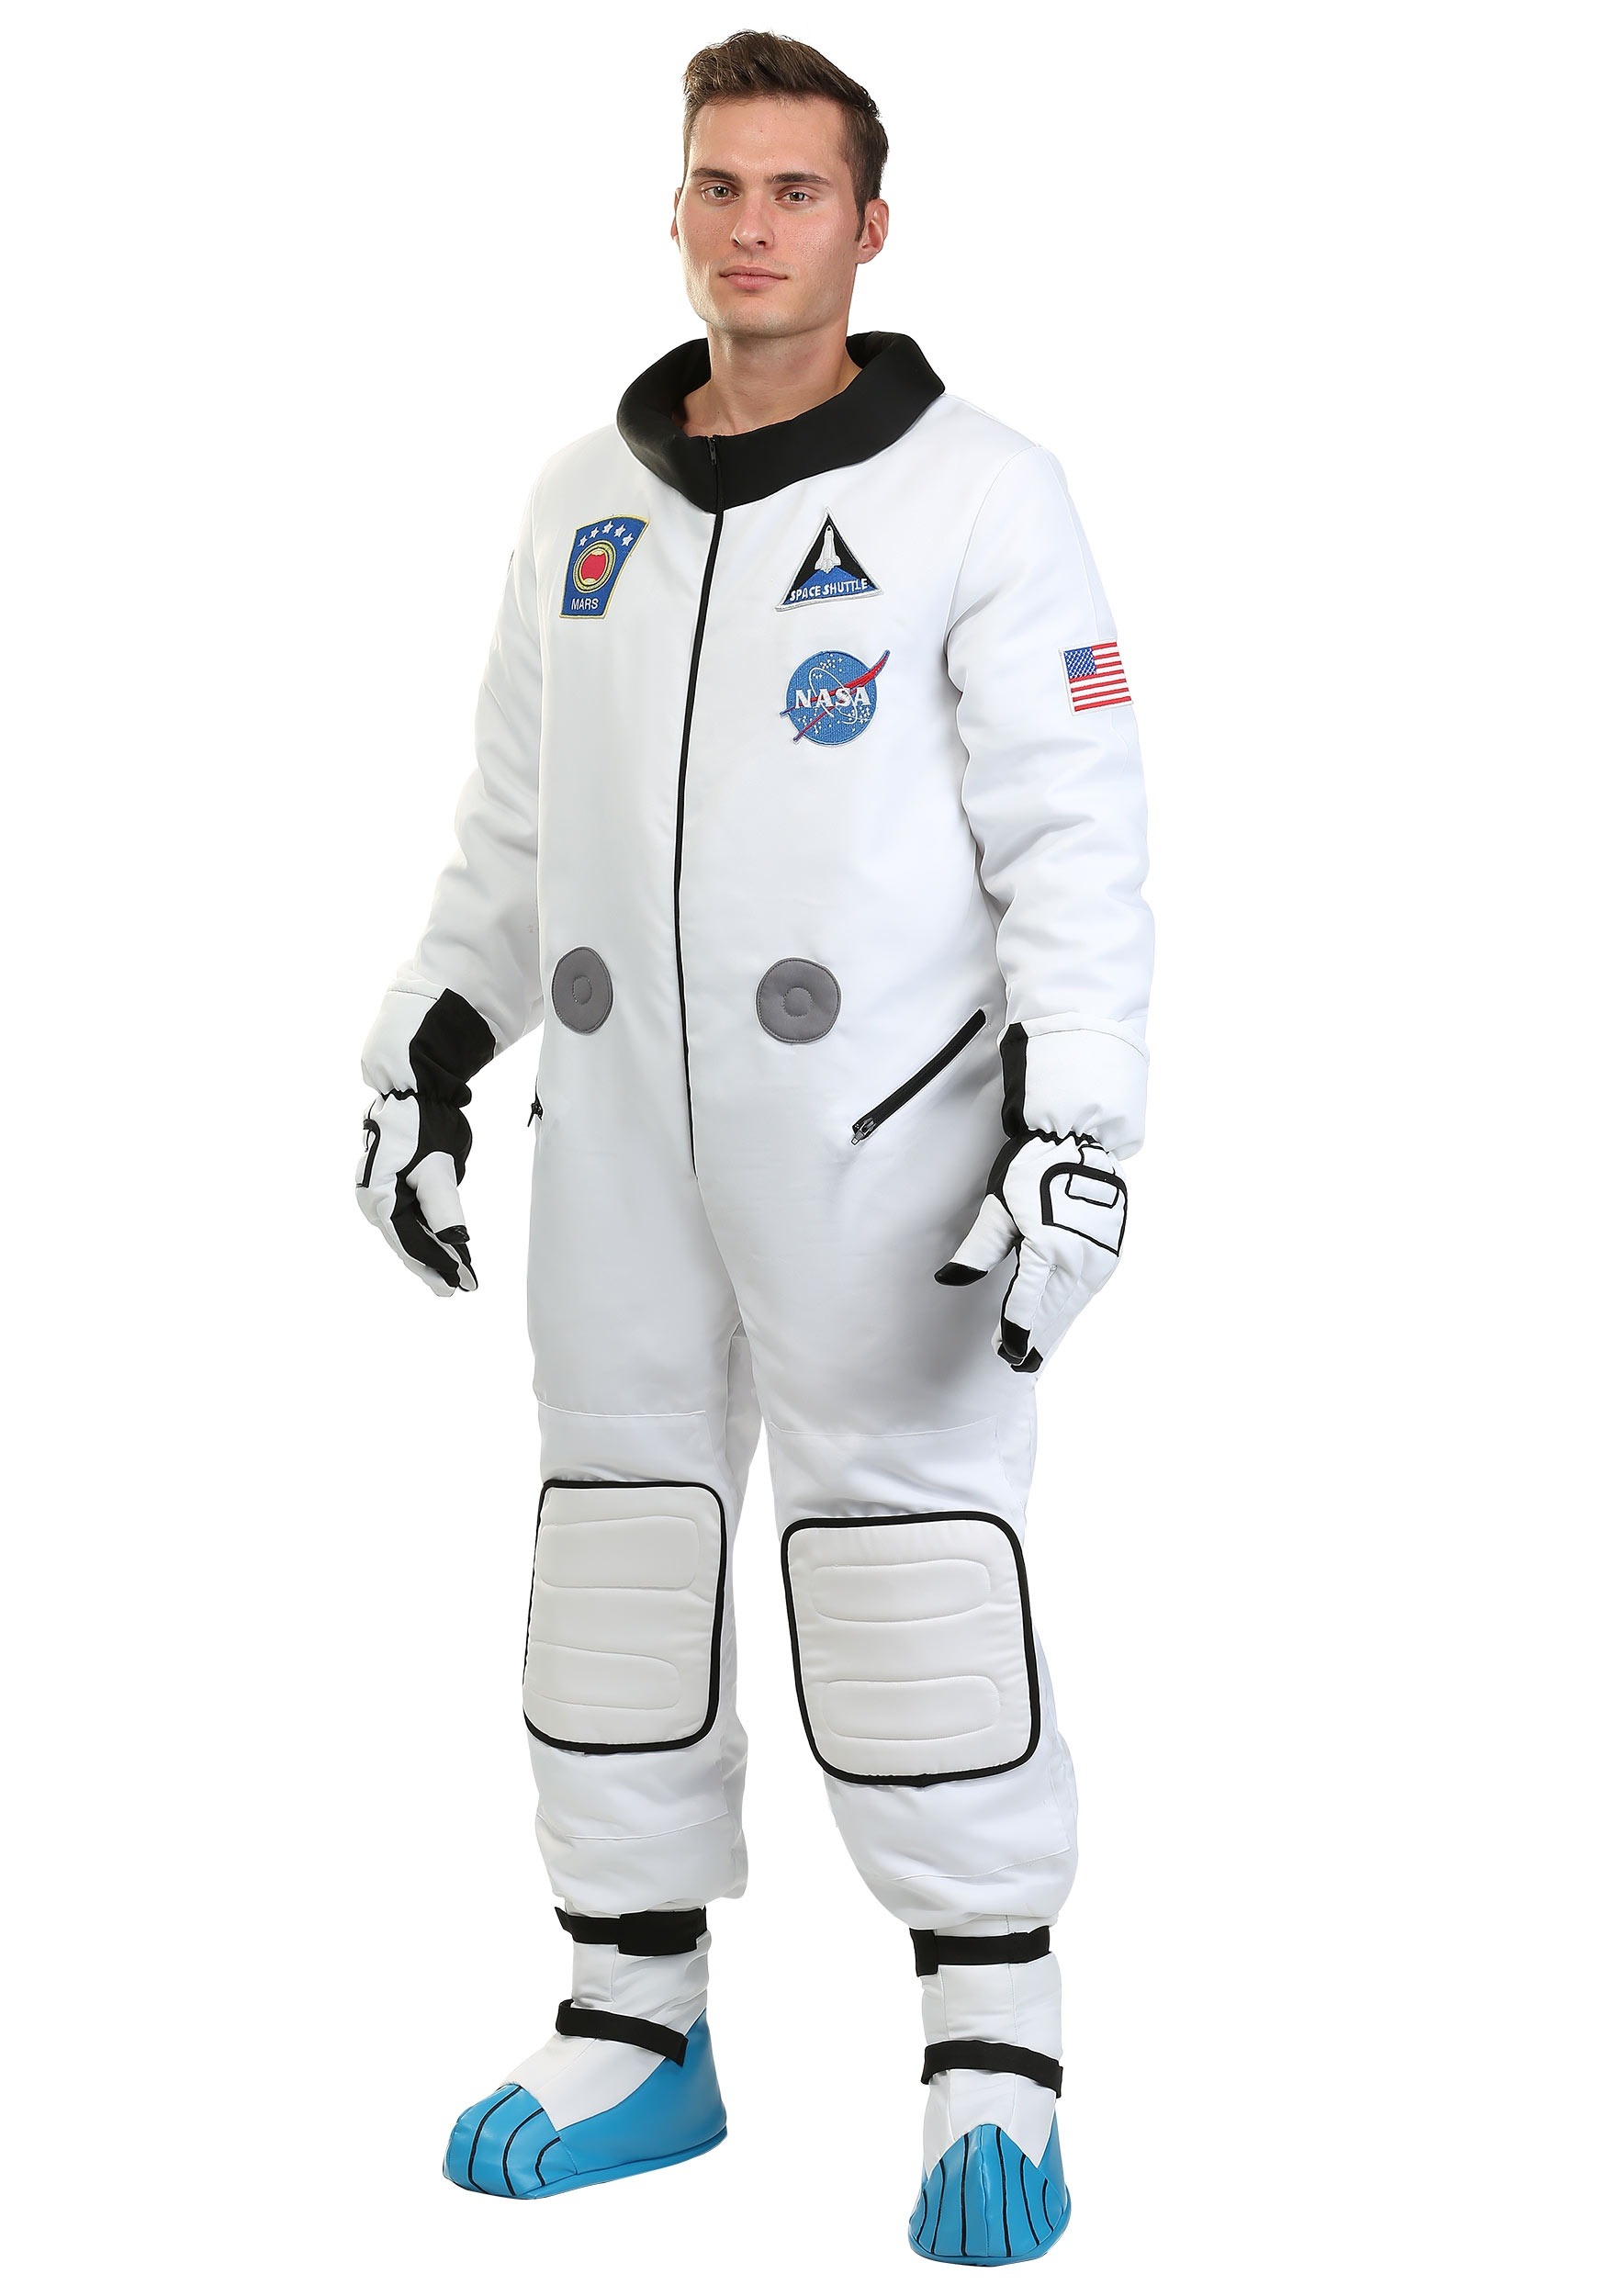 Astronaut Costume Drawing : Cartoon Astronaut Floating In Space Drawing ...